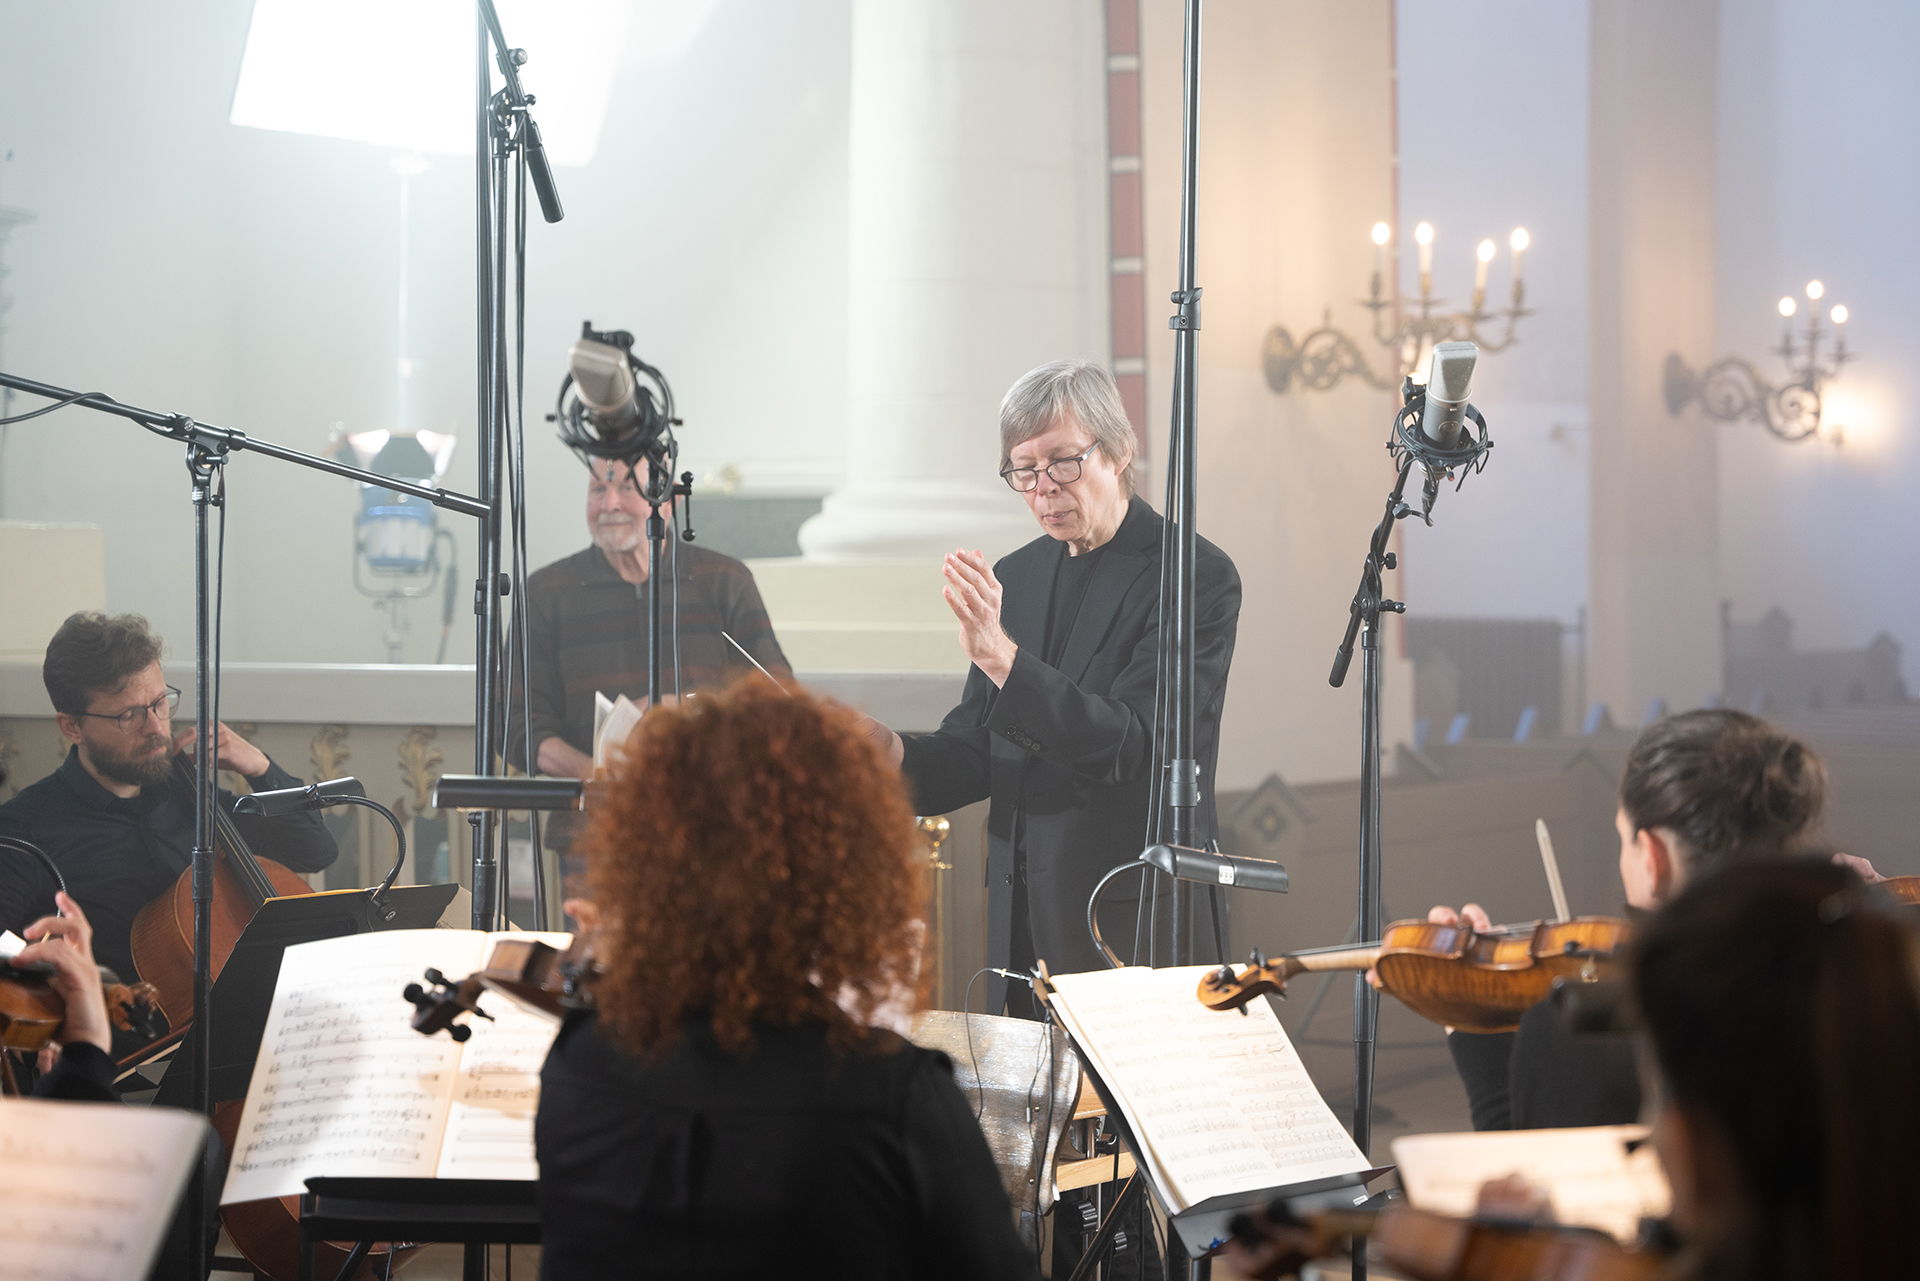 The instruments were recorded in St. John's Church in Riga with the acclaimed Sifonietta Riga and conducted by Norumnds Sne.